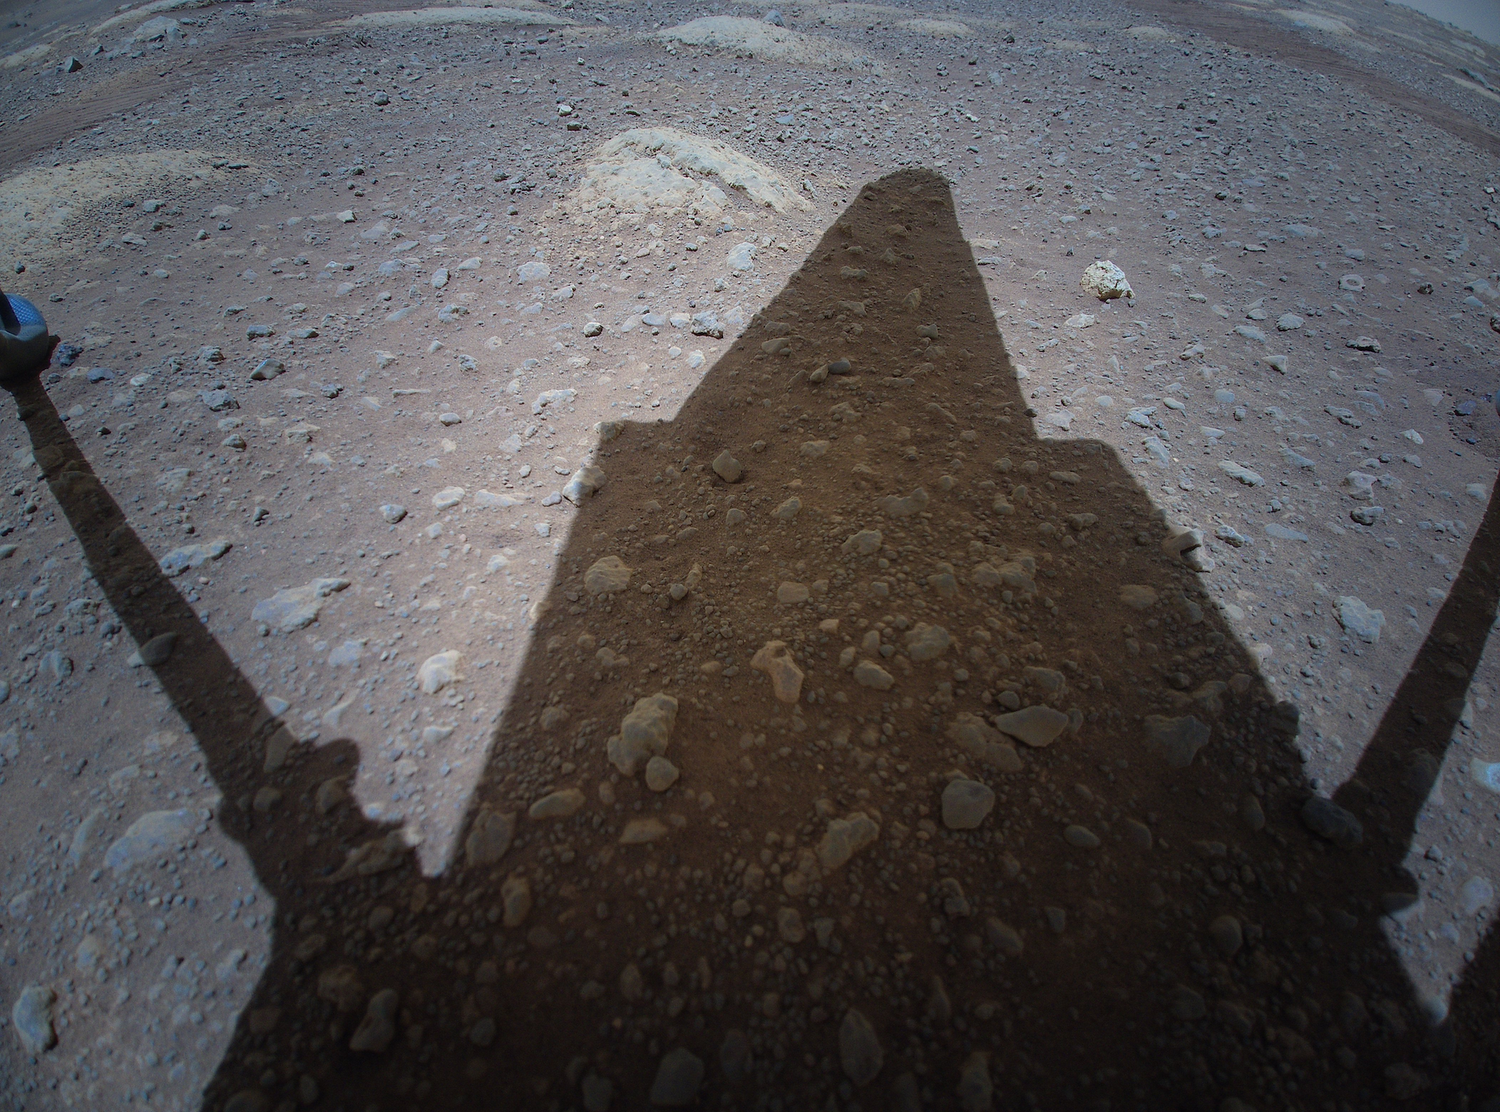 ingenuity helicopter shadow on rocky mars soil